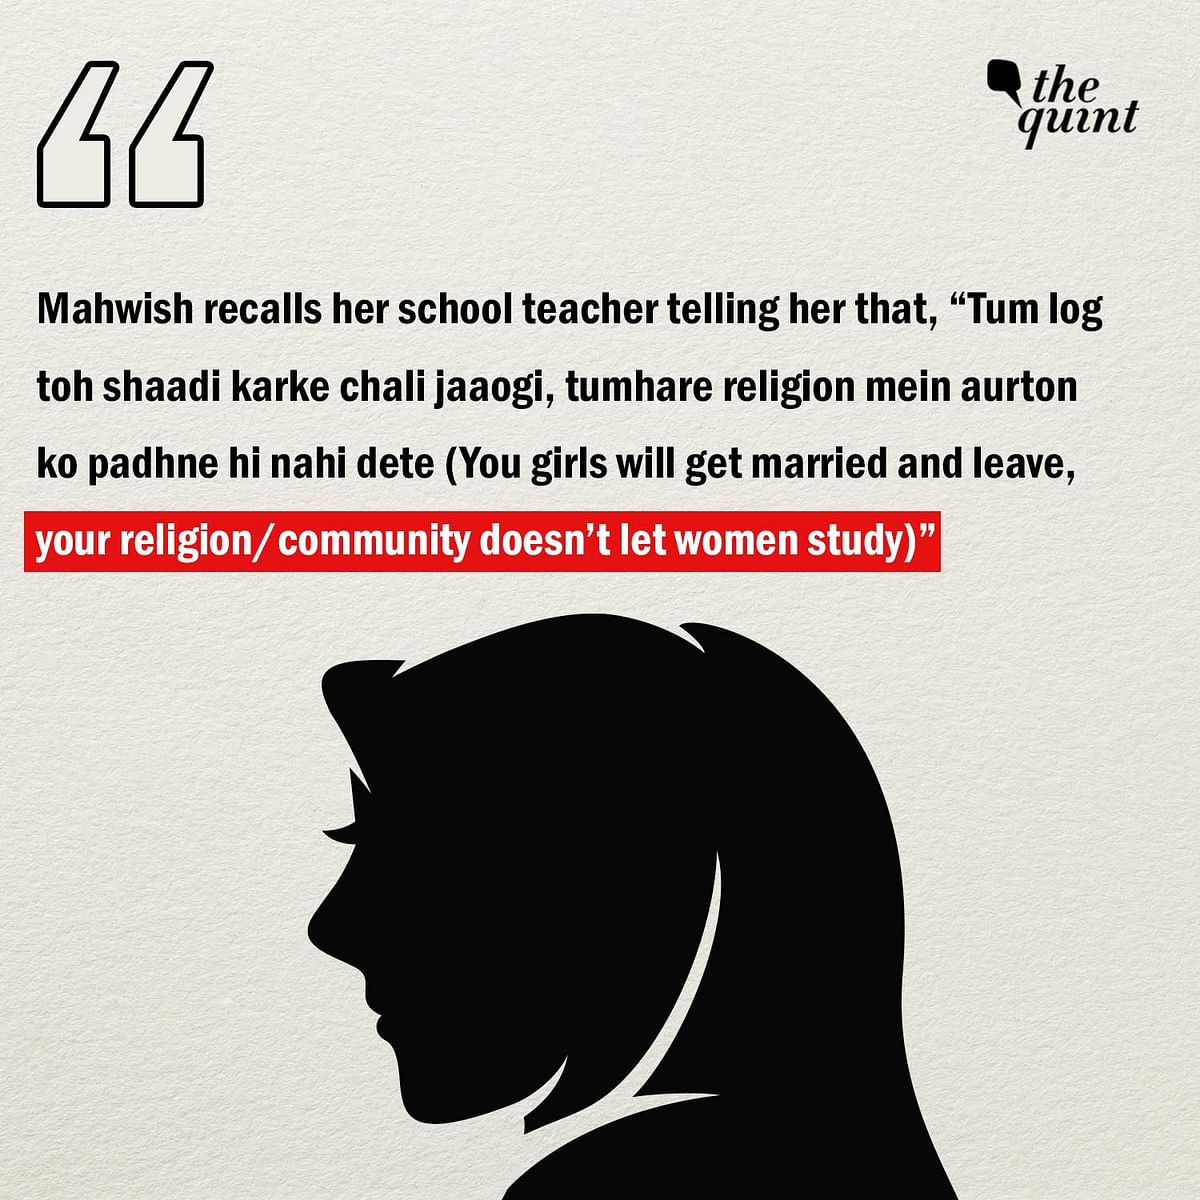 Muslim students across India, in schools and colleges, say Islamophobia by teachers has become normalised.  